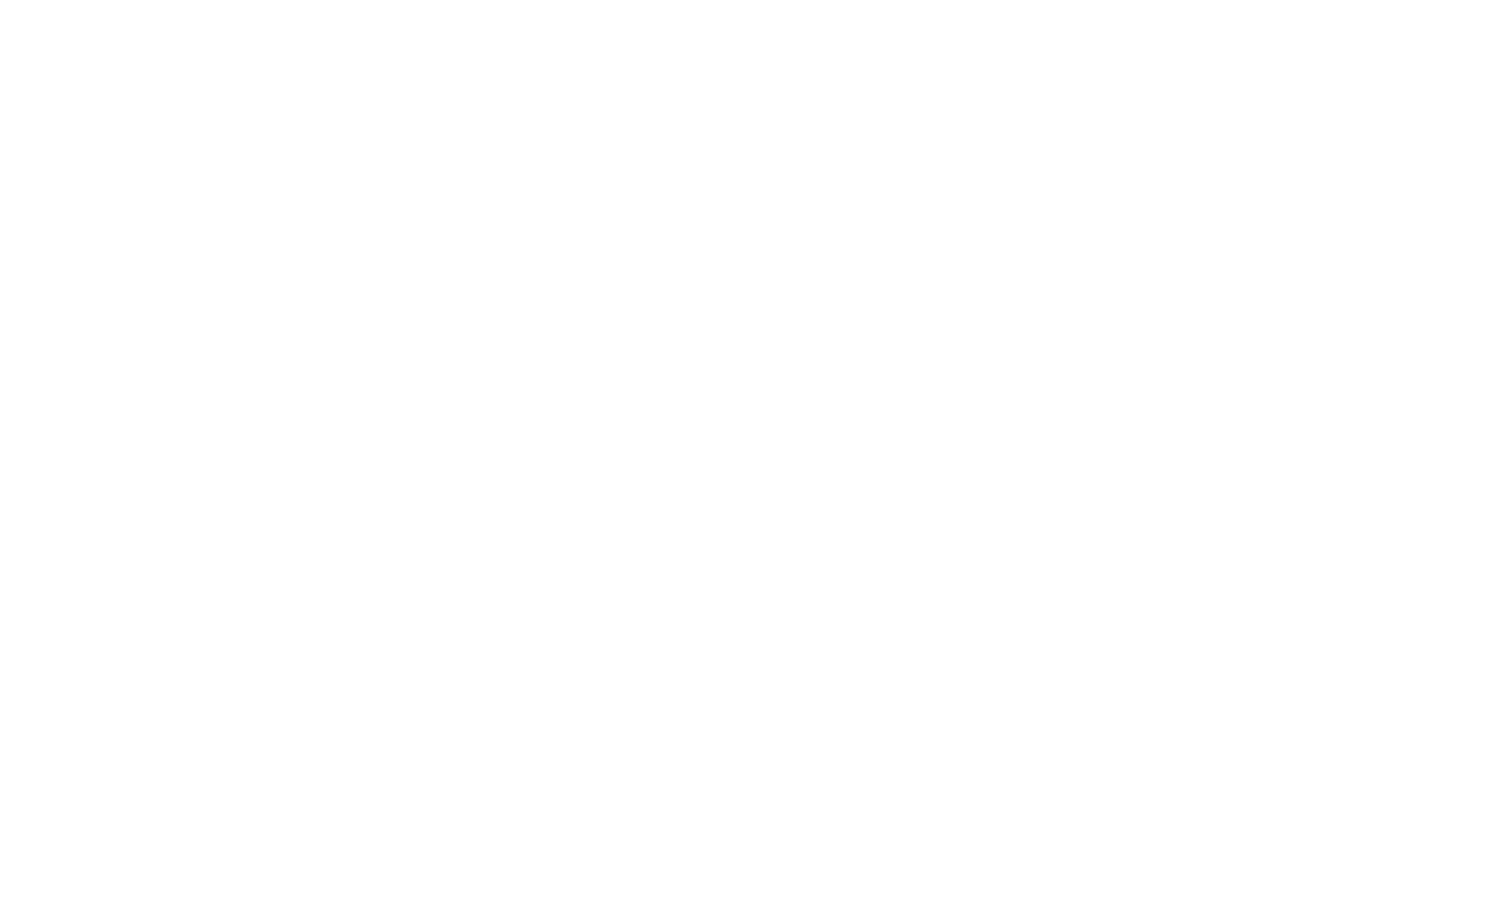 GEOX logo for dark backgrounds (transparent PNG)